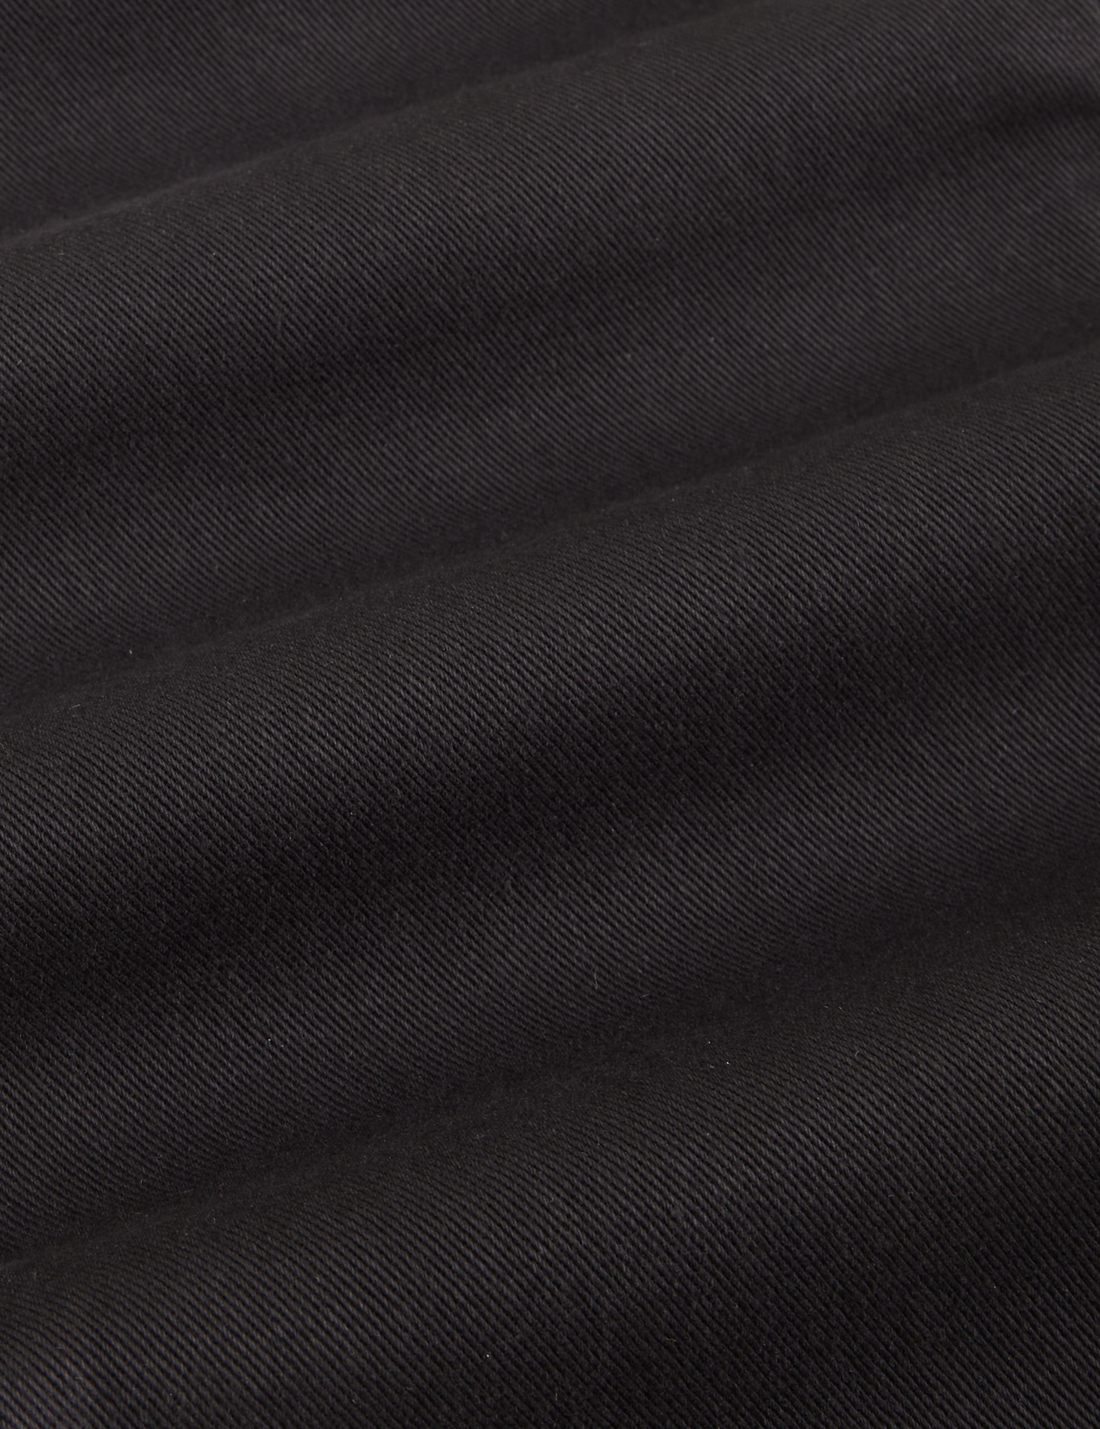 Classic Work Shorts in Basic Black fabric detail close up